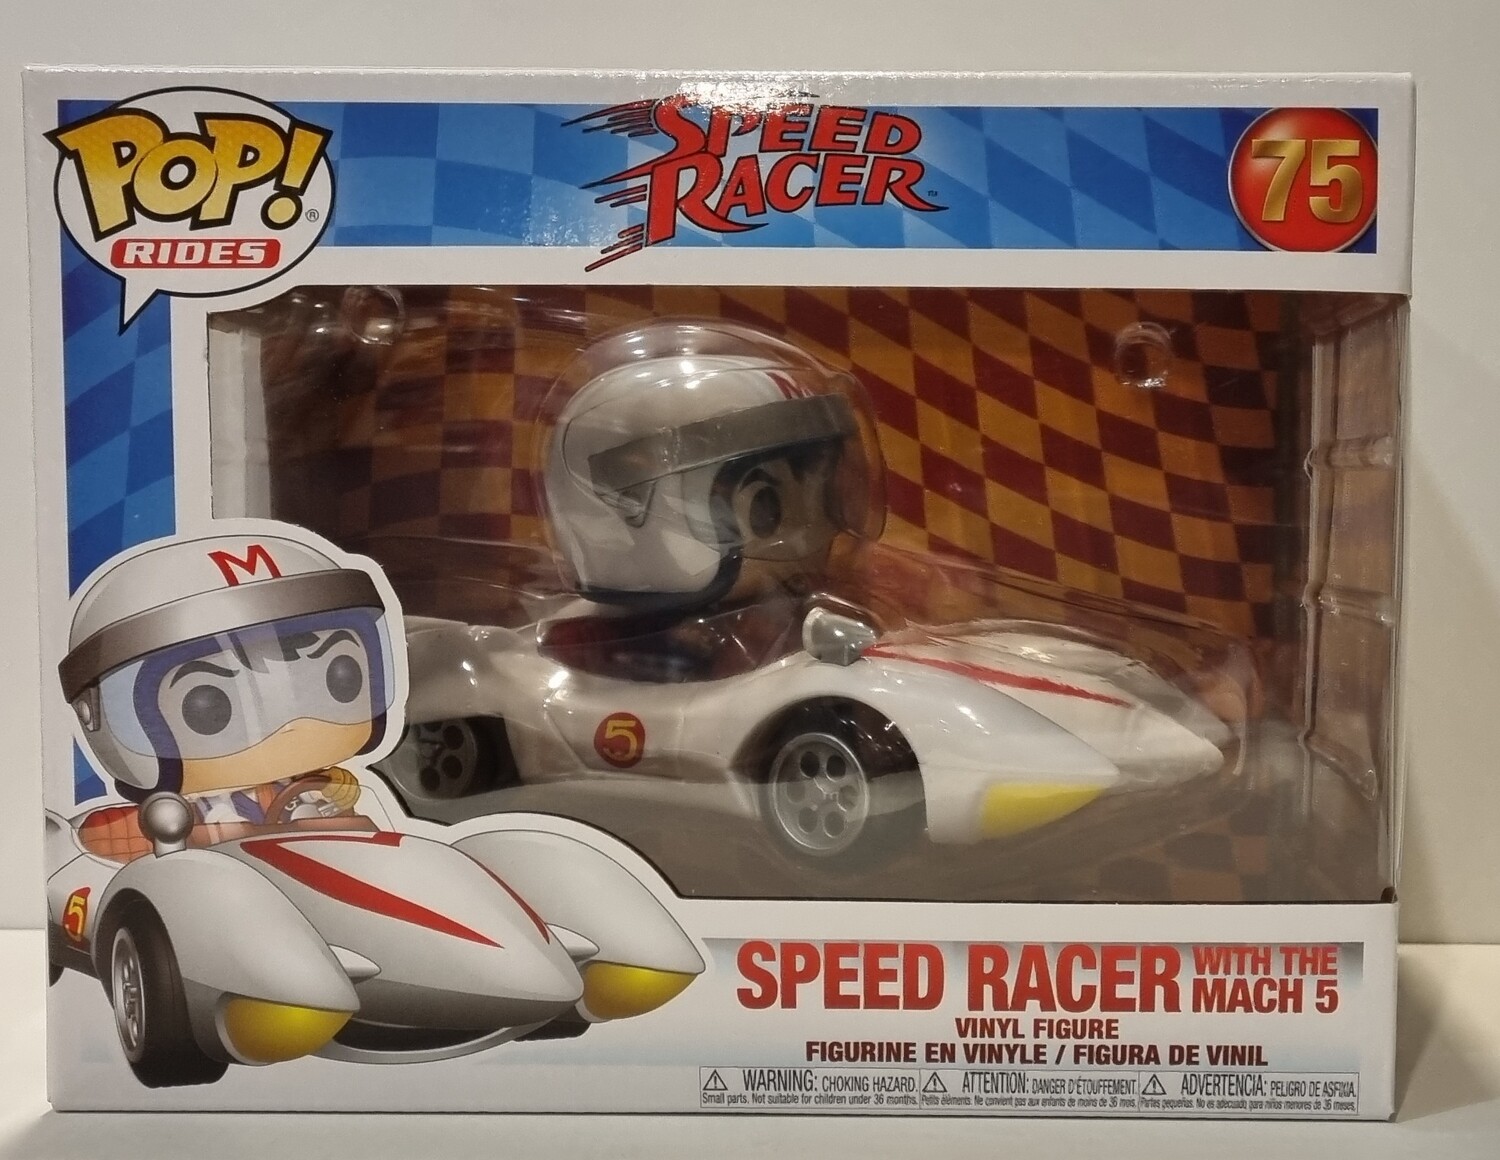 Funko Pop!, Speed Racer (with the mach 5), #75, Rides